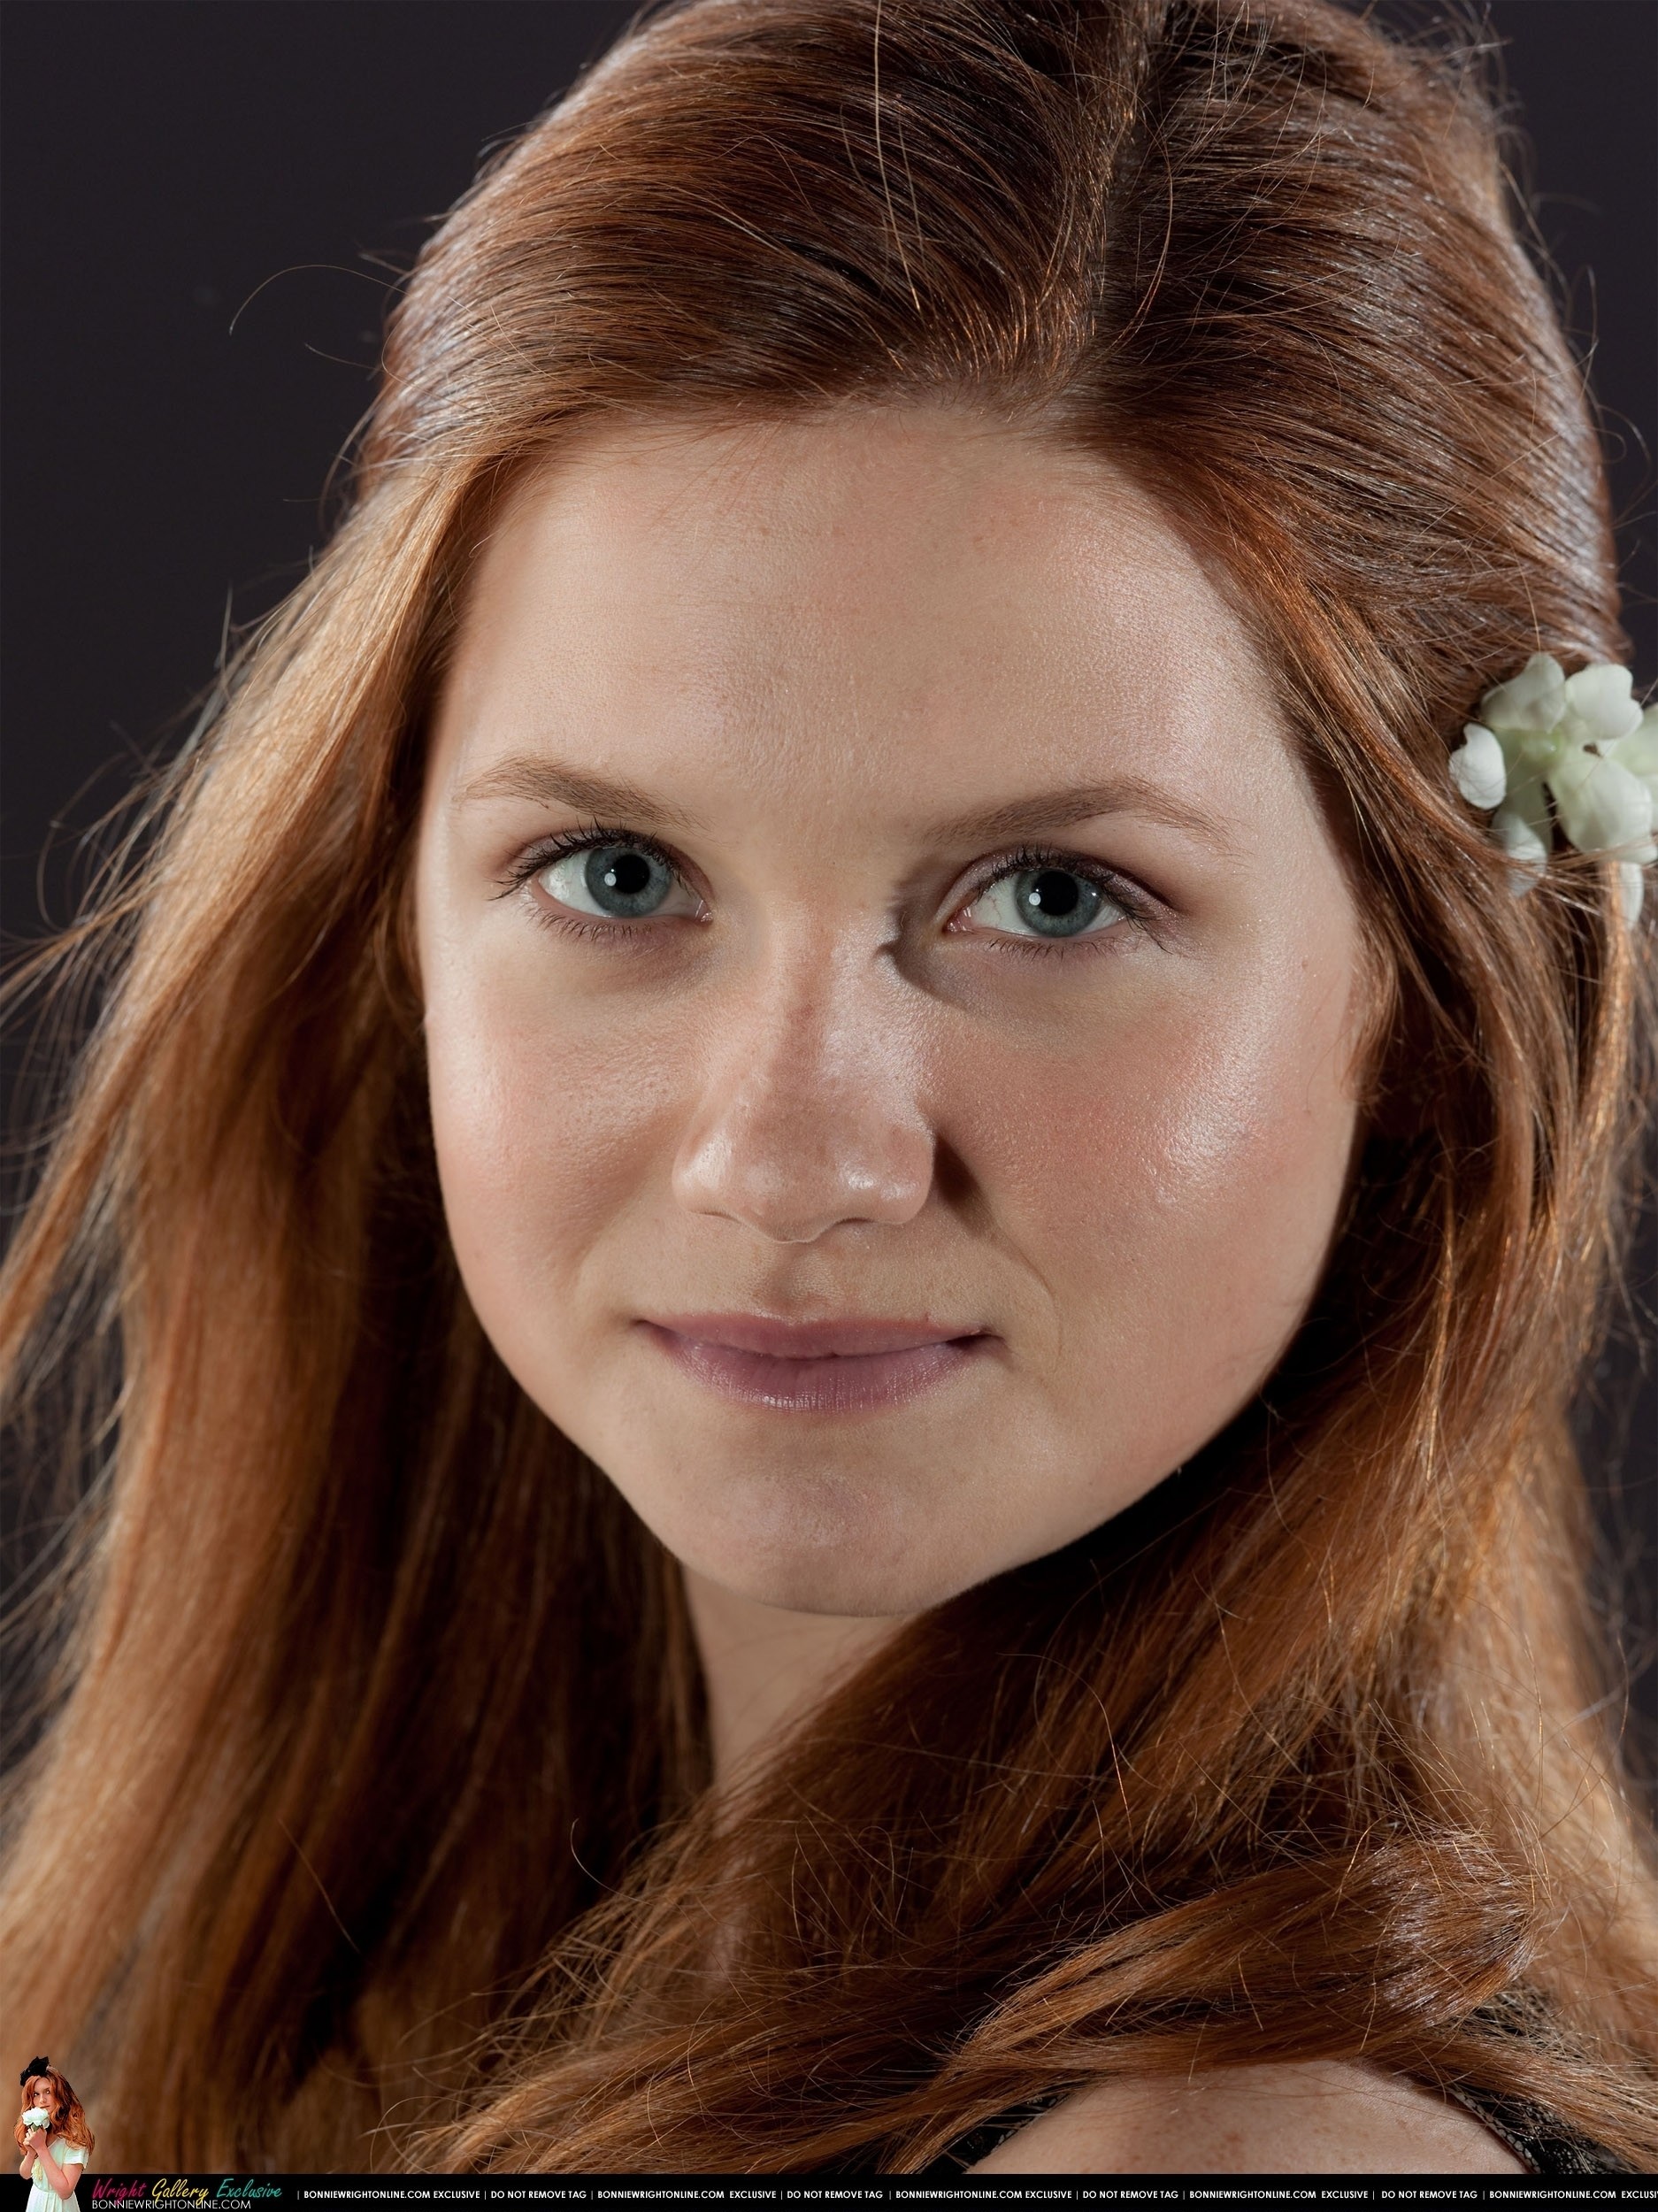 1874x2500 Day 3-Favorite Character: Ginny Weasley. And